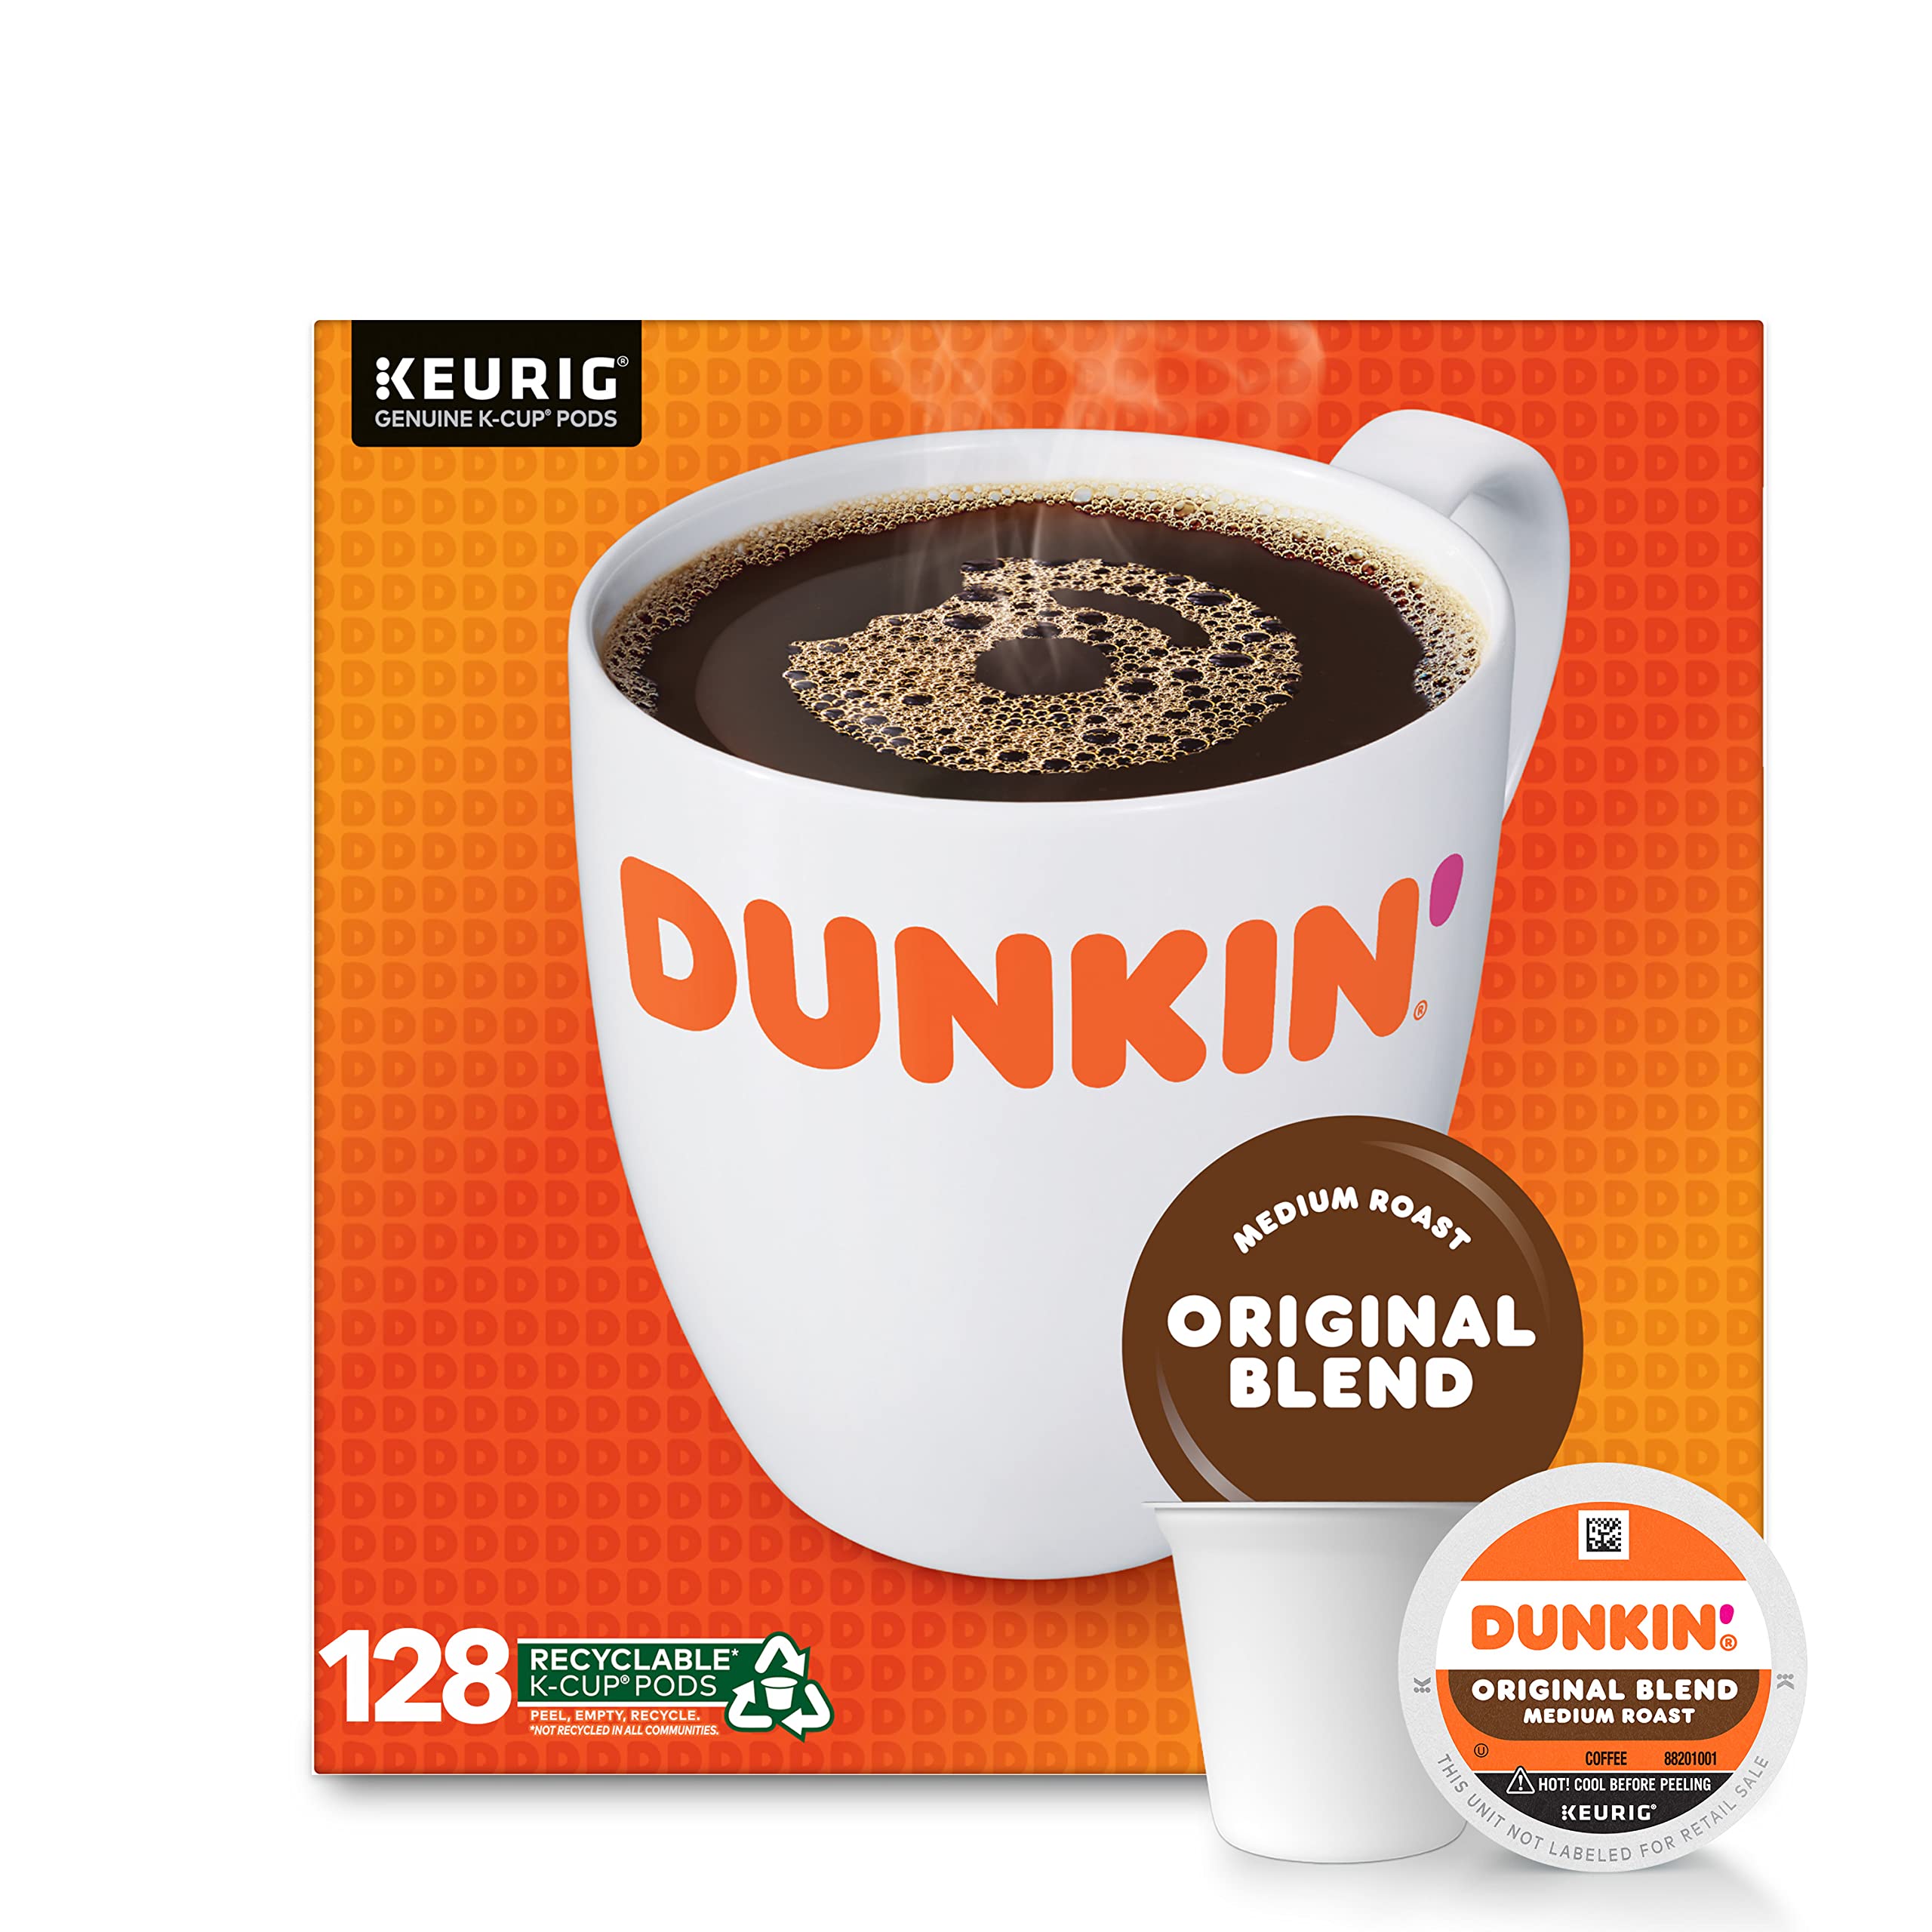 128-Count (4-Pack 32-Count) Dunkin' Original Blend Coffee K-Cup Pods (Medium Roast) $35.65 w/ S&S + Free Shipping